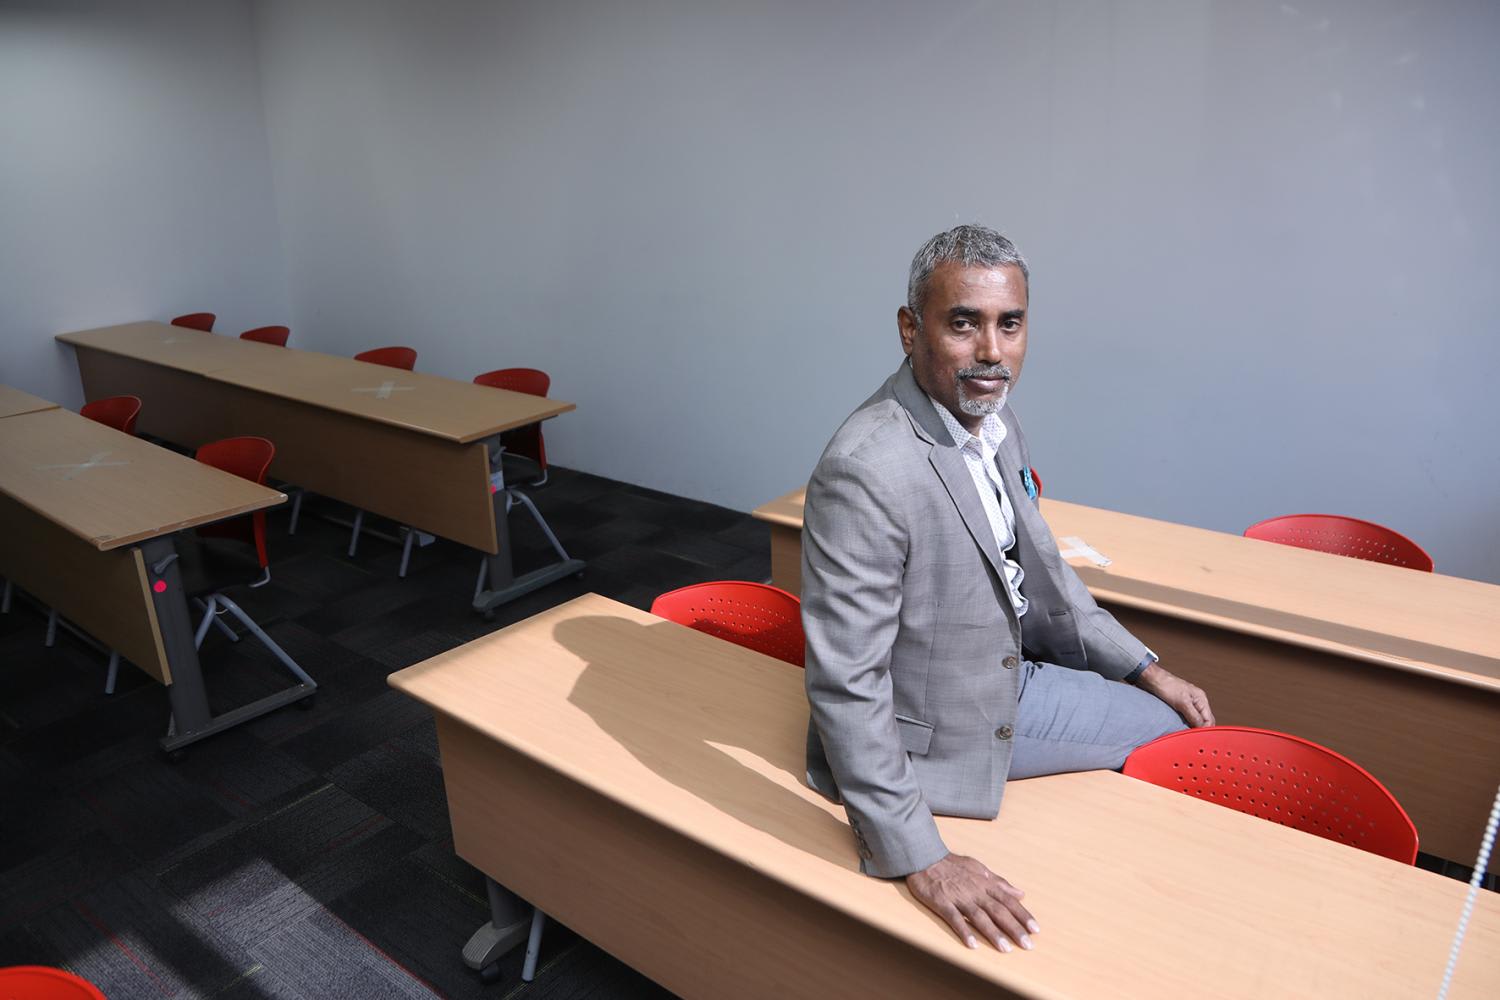 Mr Rathakrishnan Govind, 57, is chief executive officer of London School of Business and Finance, which has been operating in Singapore since 2010.